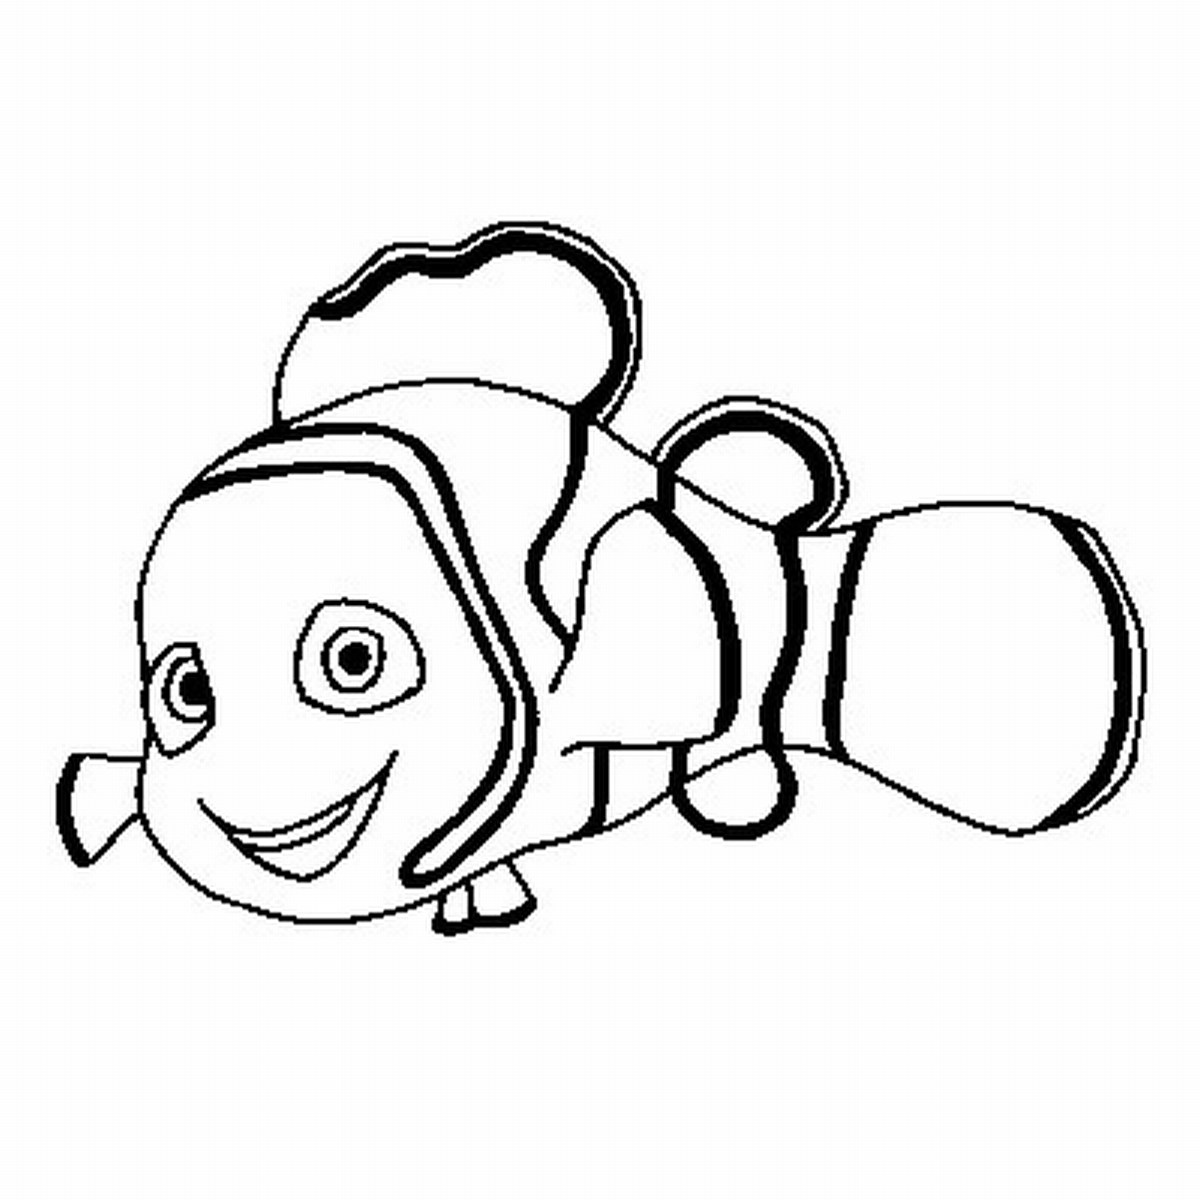 Nemo Coloring Pages | Cartoon Coloring Pages | Kids Coloring Pages ...